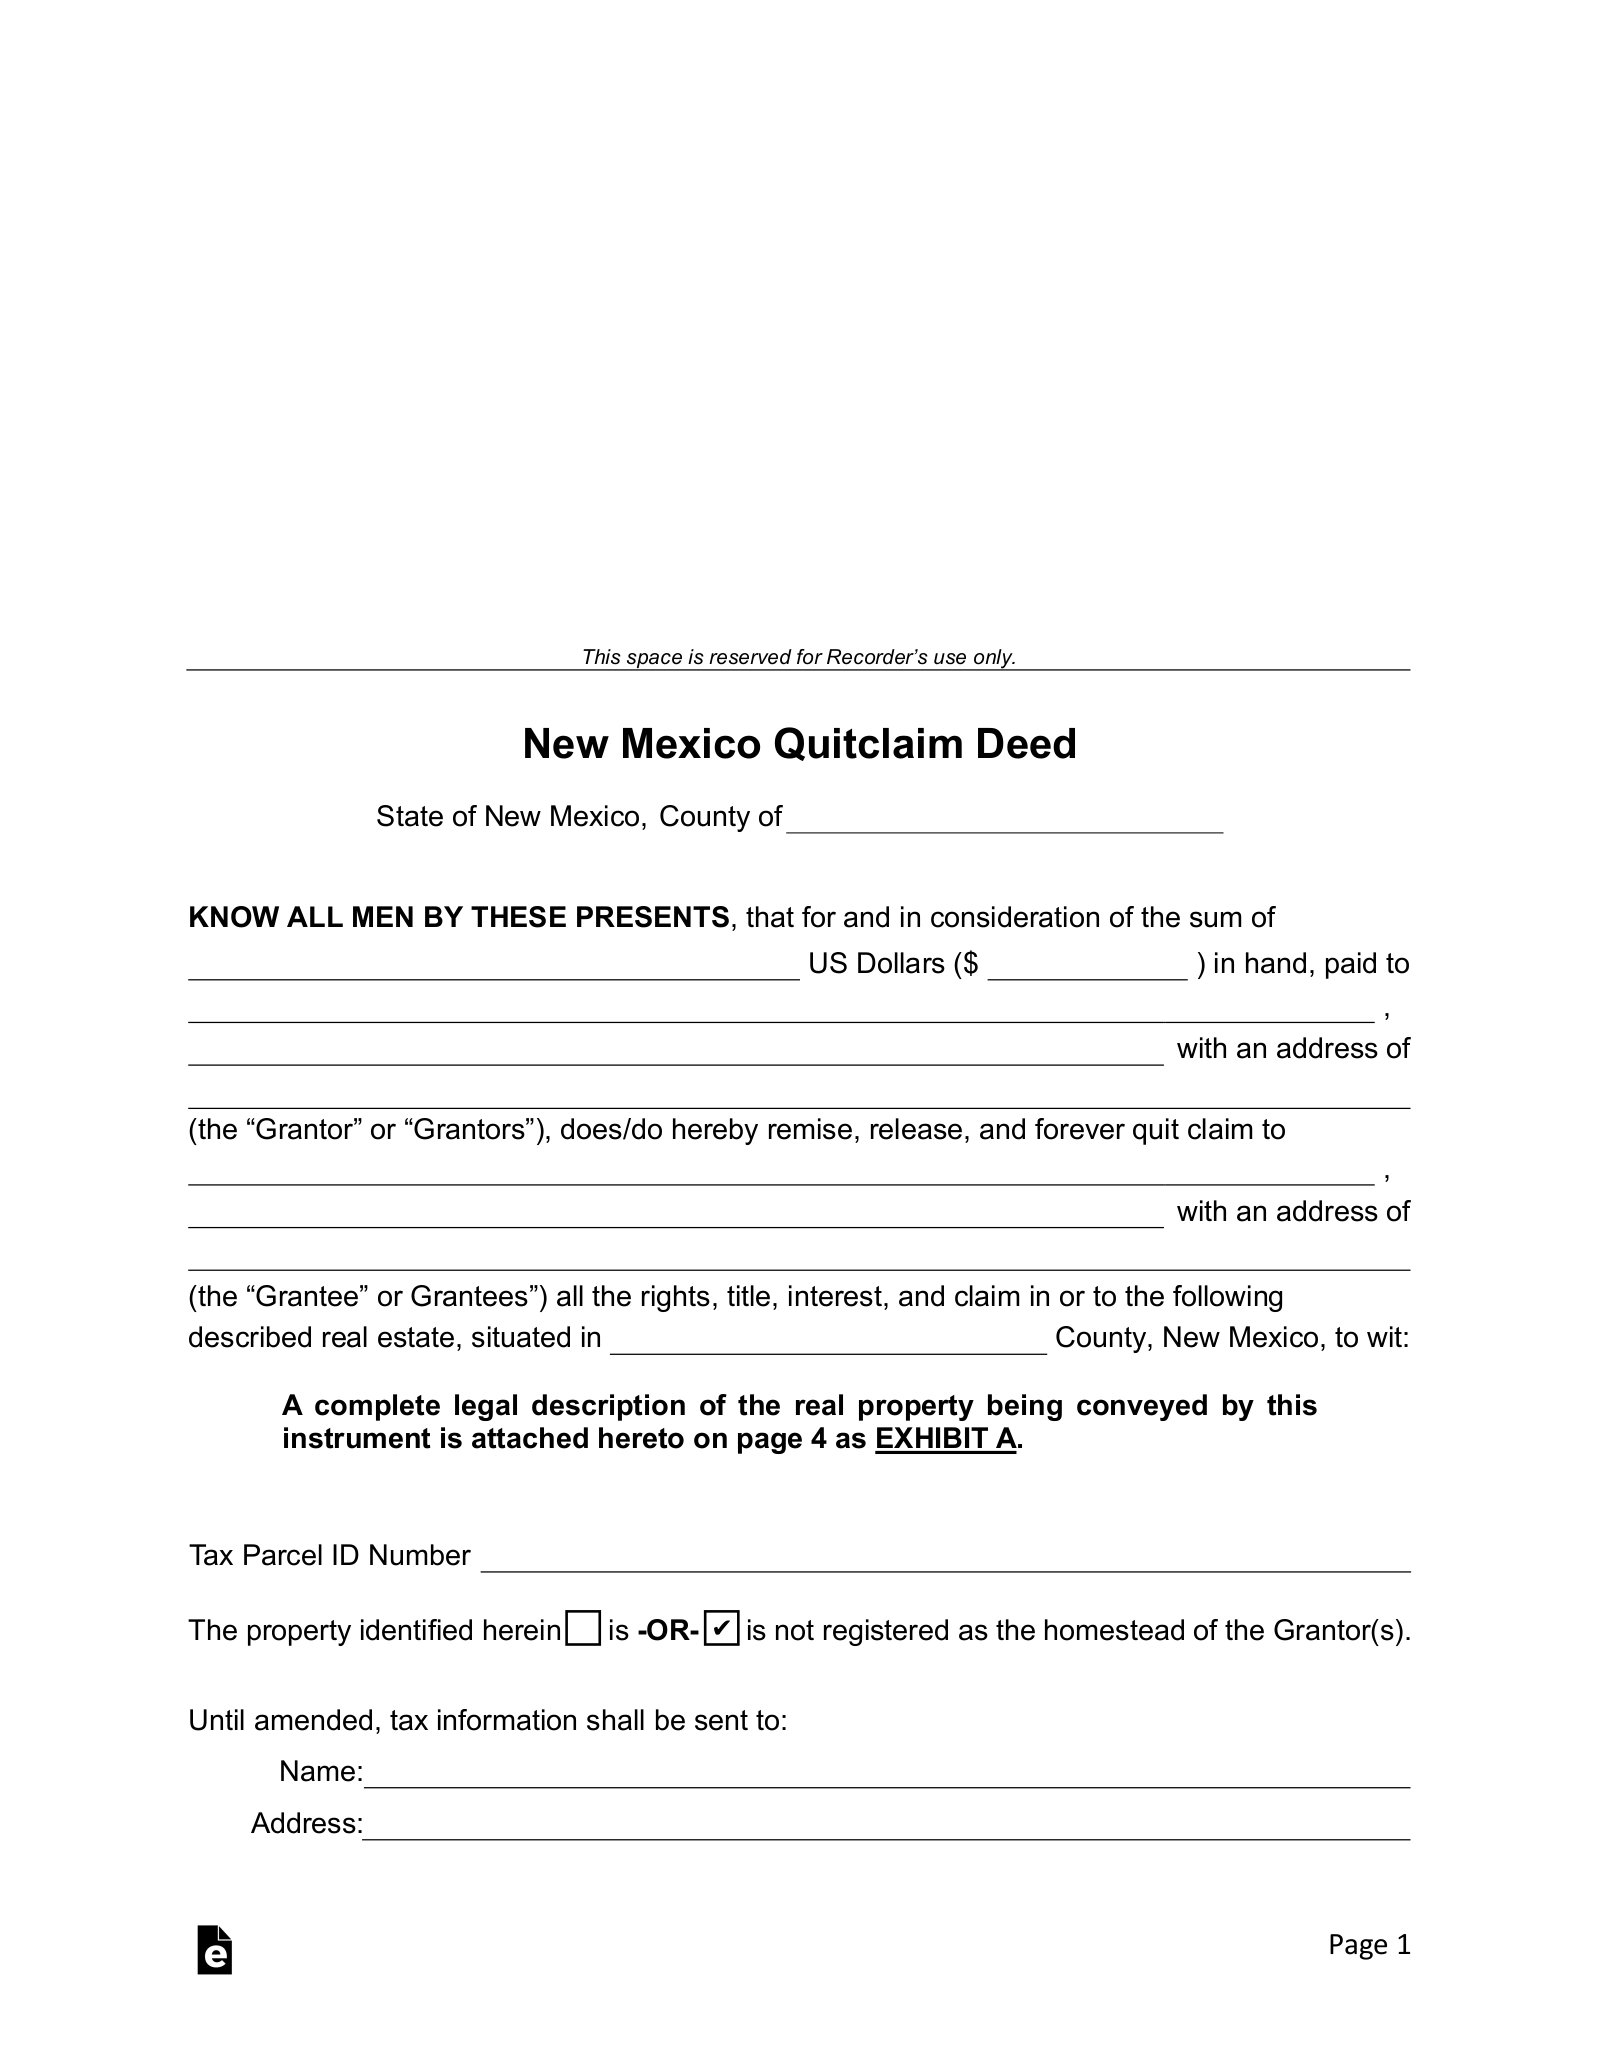 New Mexico Quit Claim Deed